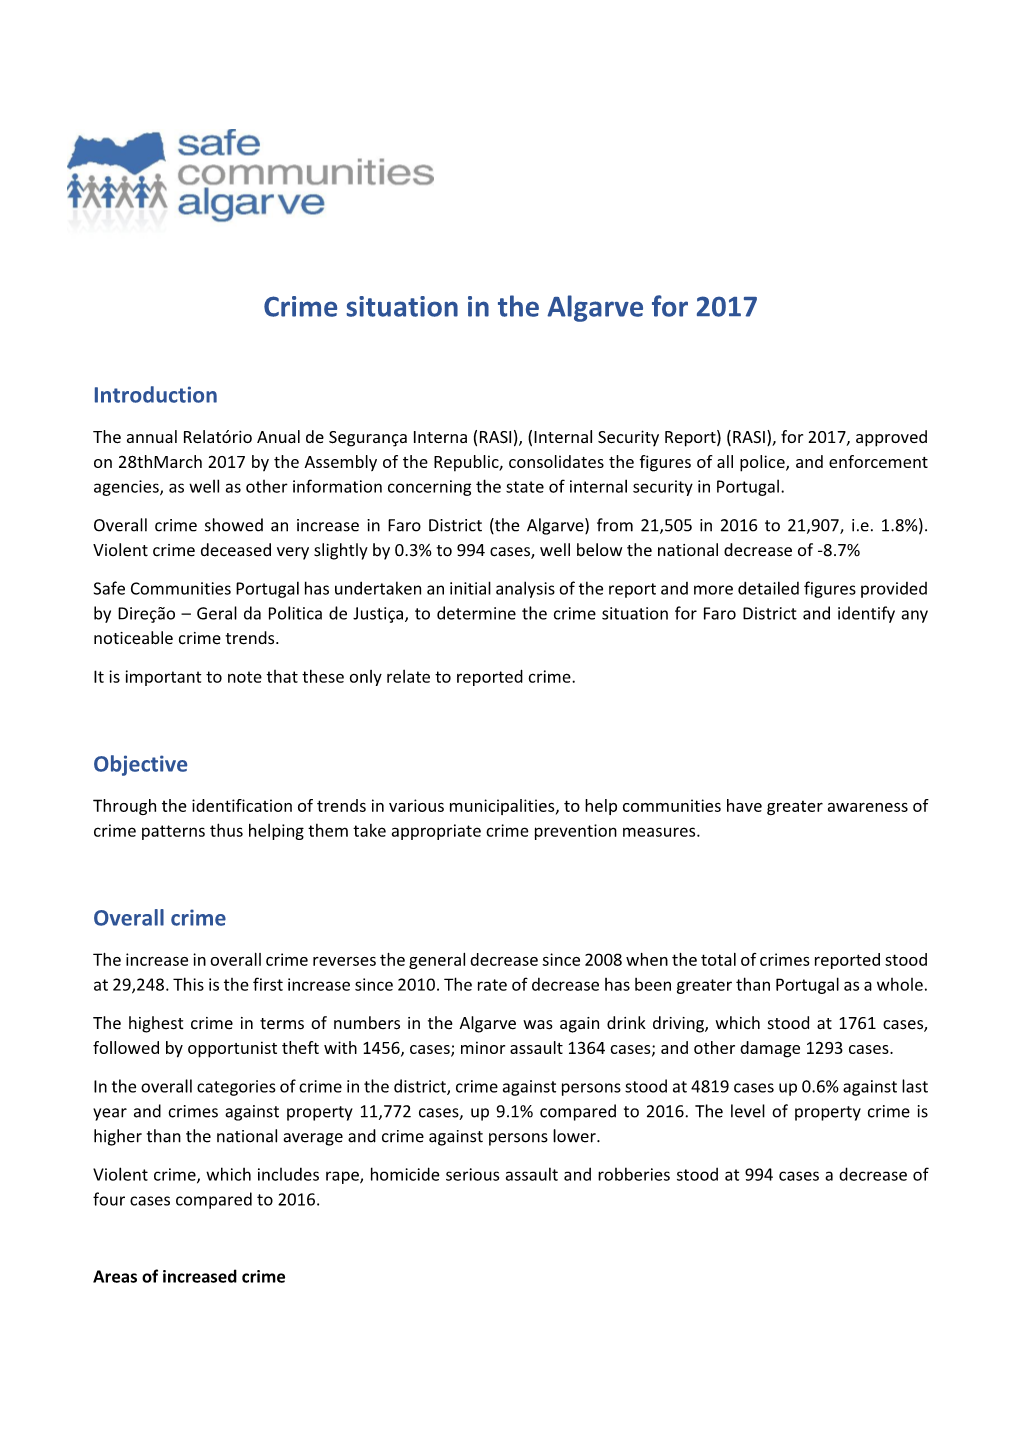 Crime Situation in the Algarve for 2017